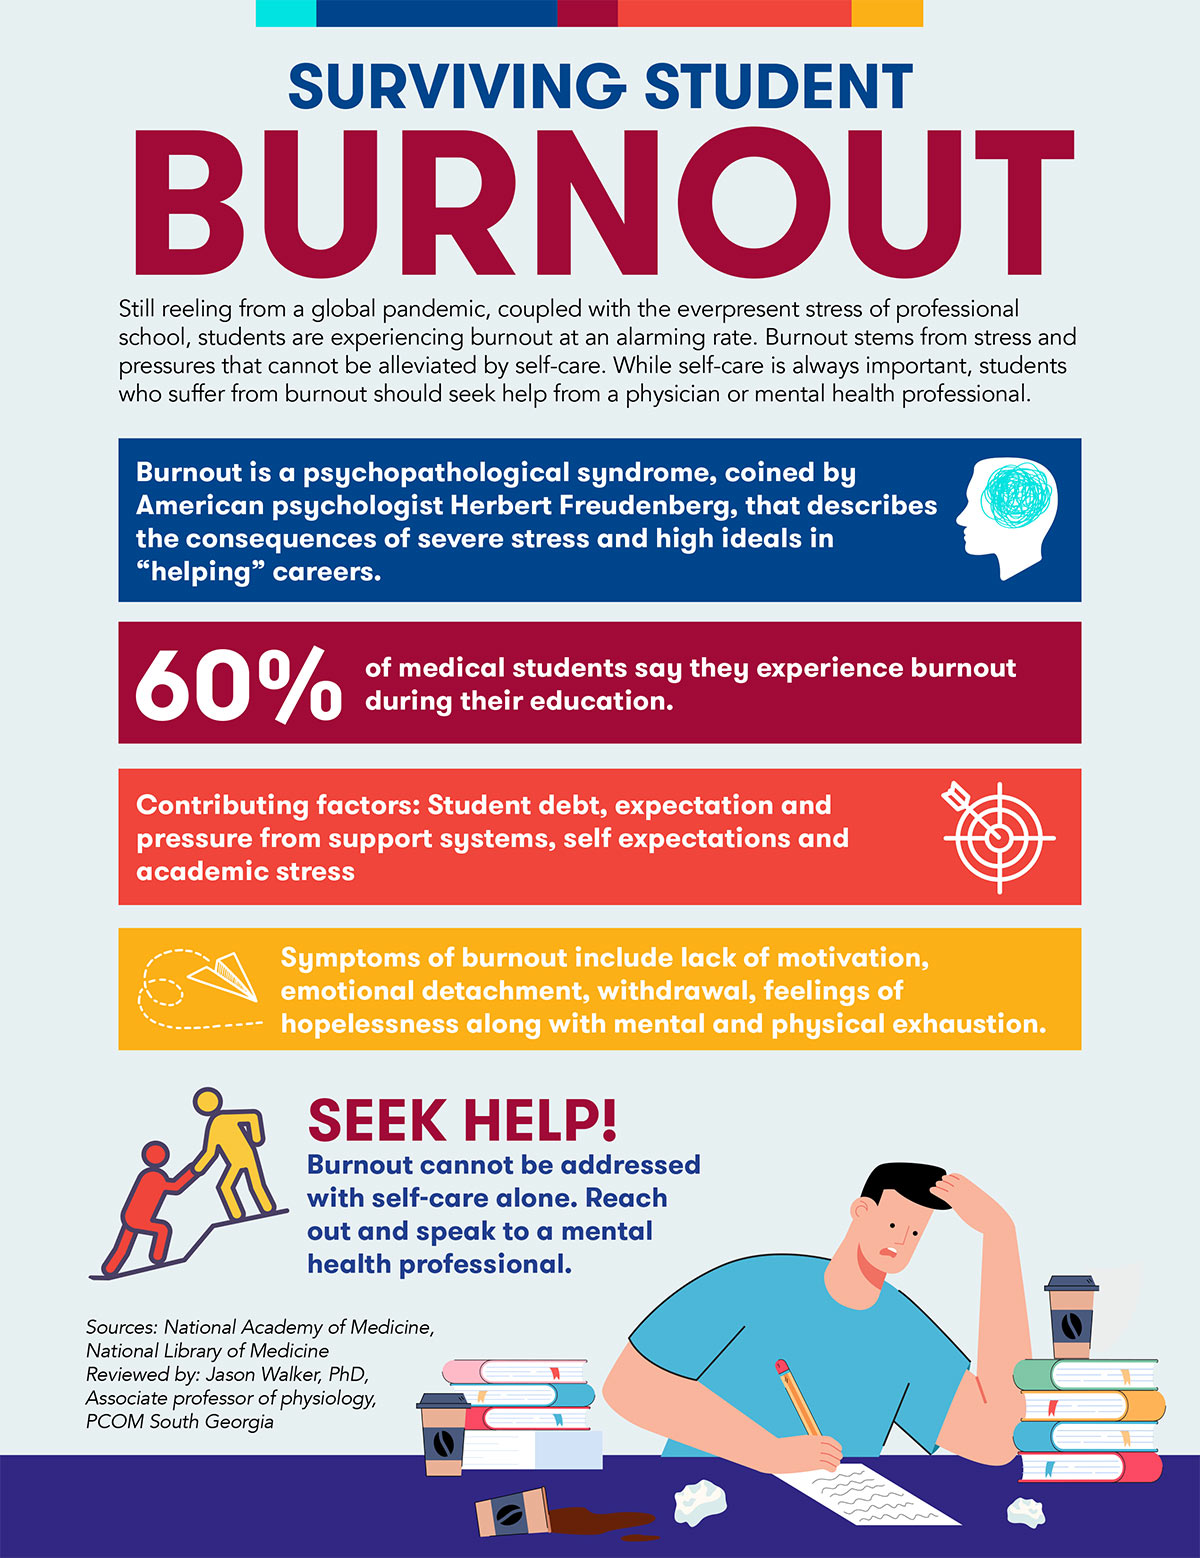 Student burnout infographic with symptoms, explanations and tips for help and recovery